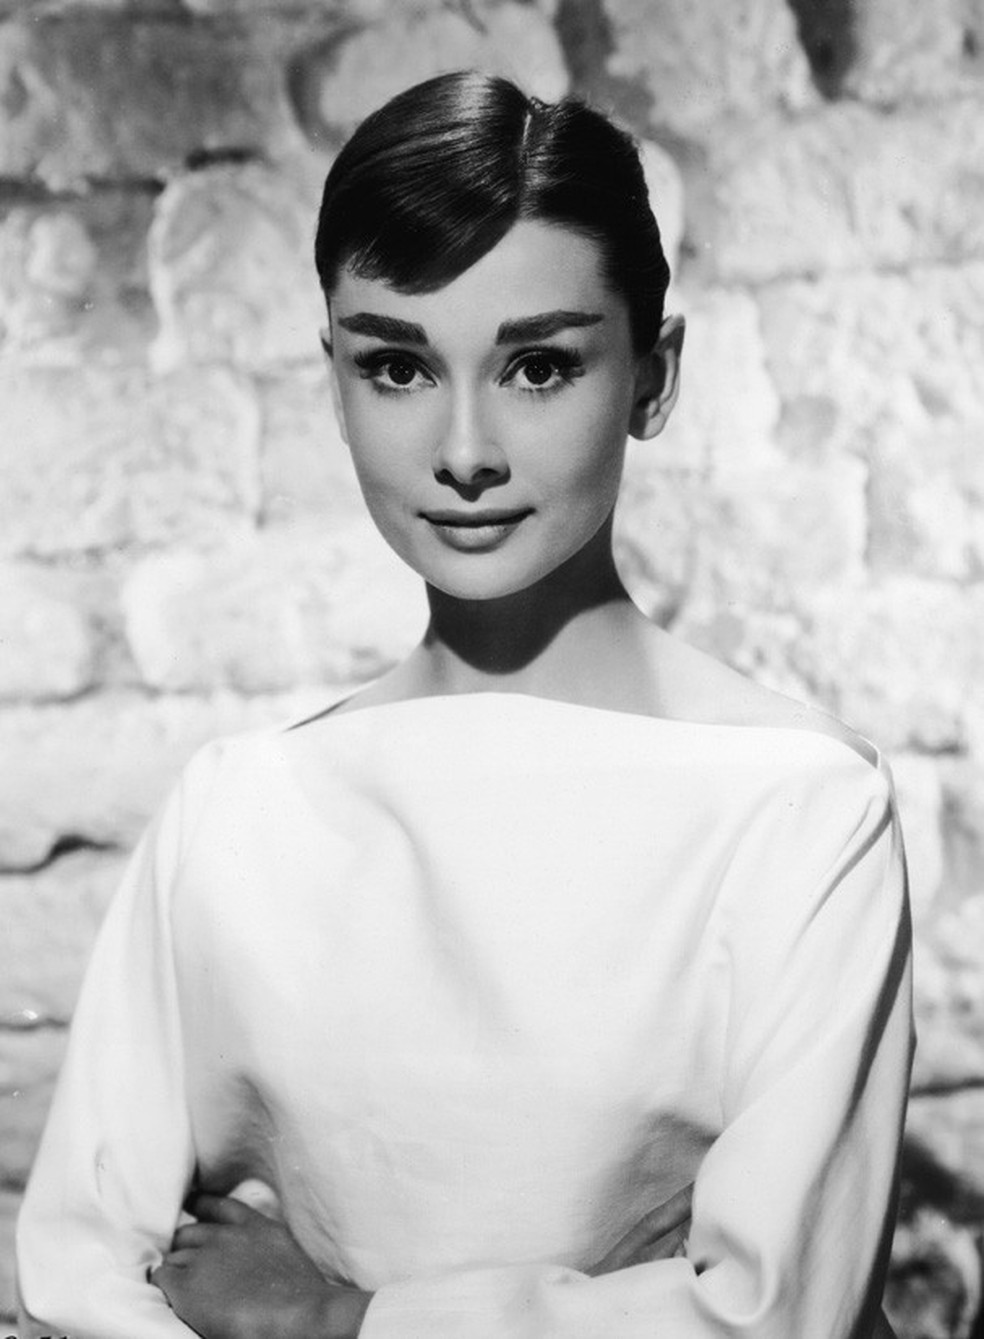 Portrait of Belgian-born American actress Audrey Hepburn (1929 - 1993) ina white long-sleeved dress, mid 1950s. (Photo by /Getty Images) (Foto: Getty Images) — Foto: Glamour